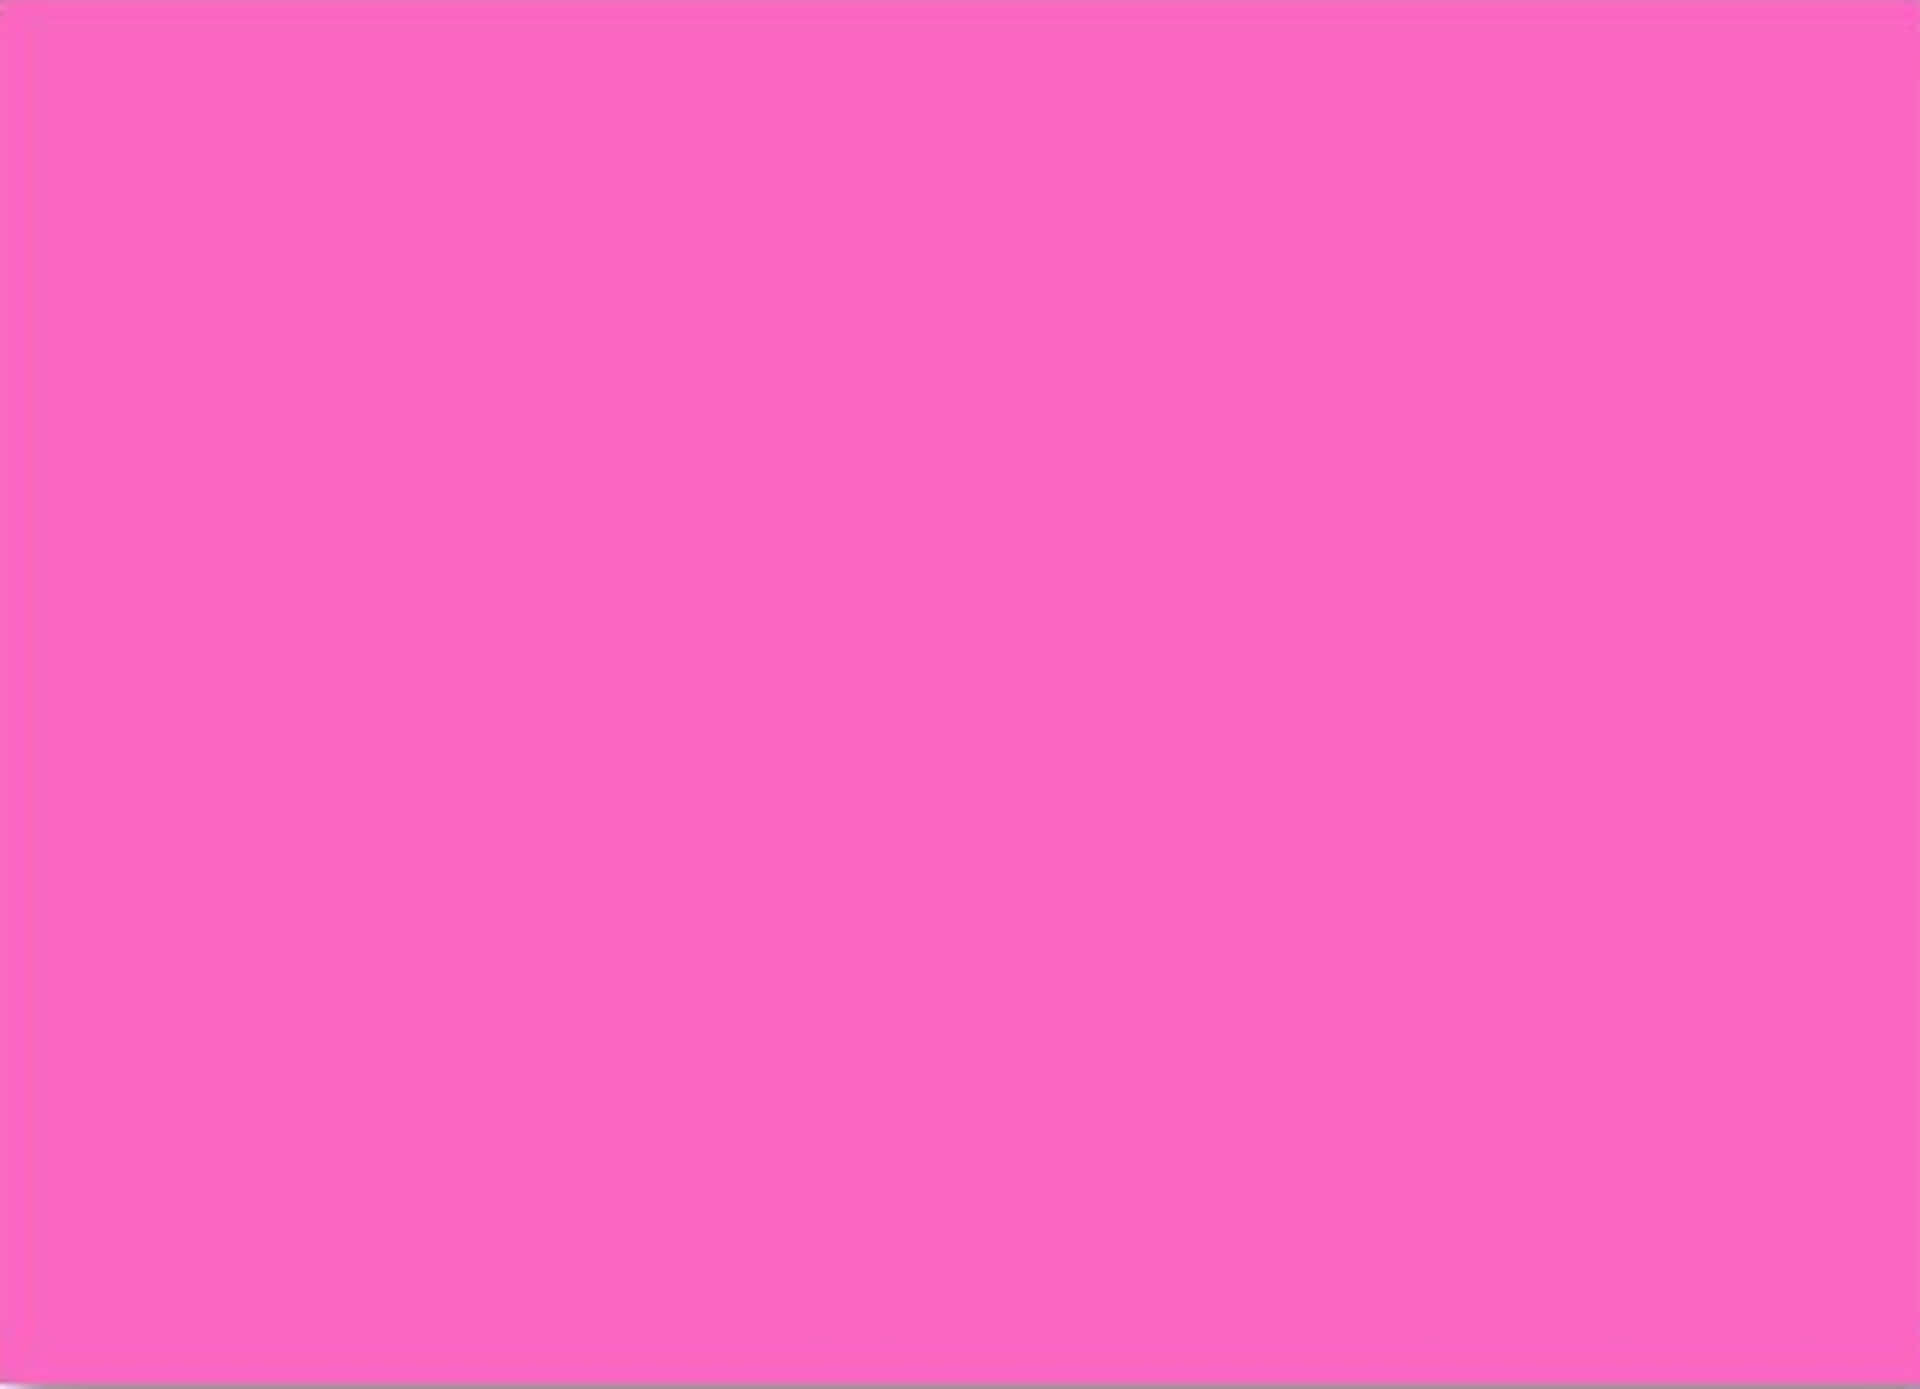 A beautiful, vibrant and energetic hot pink background